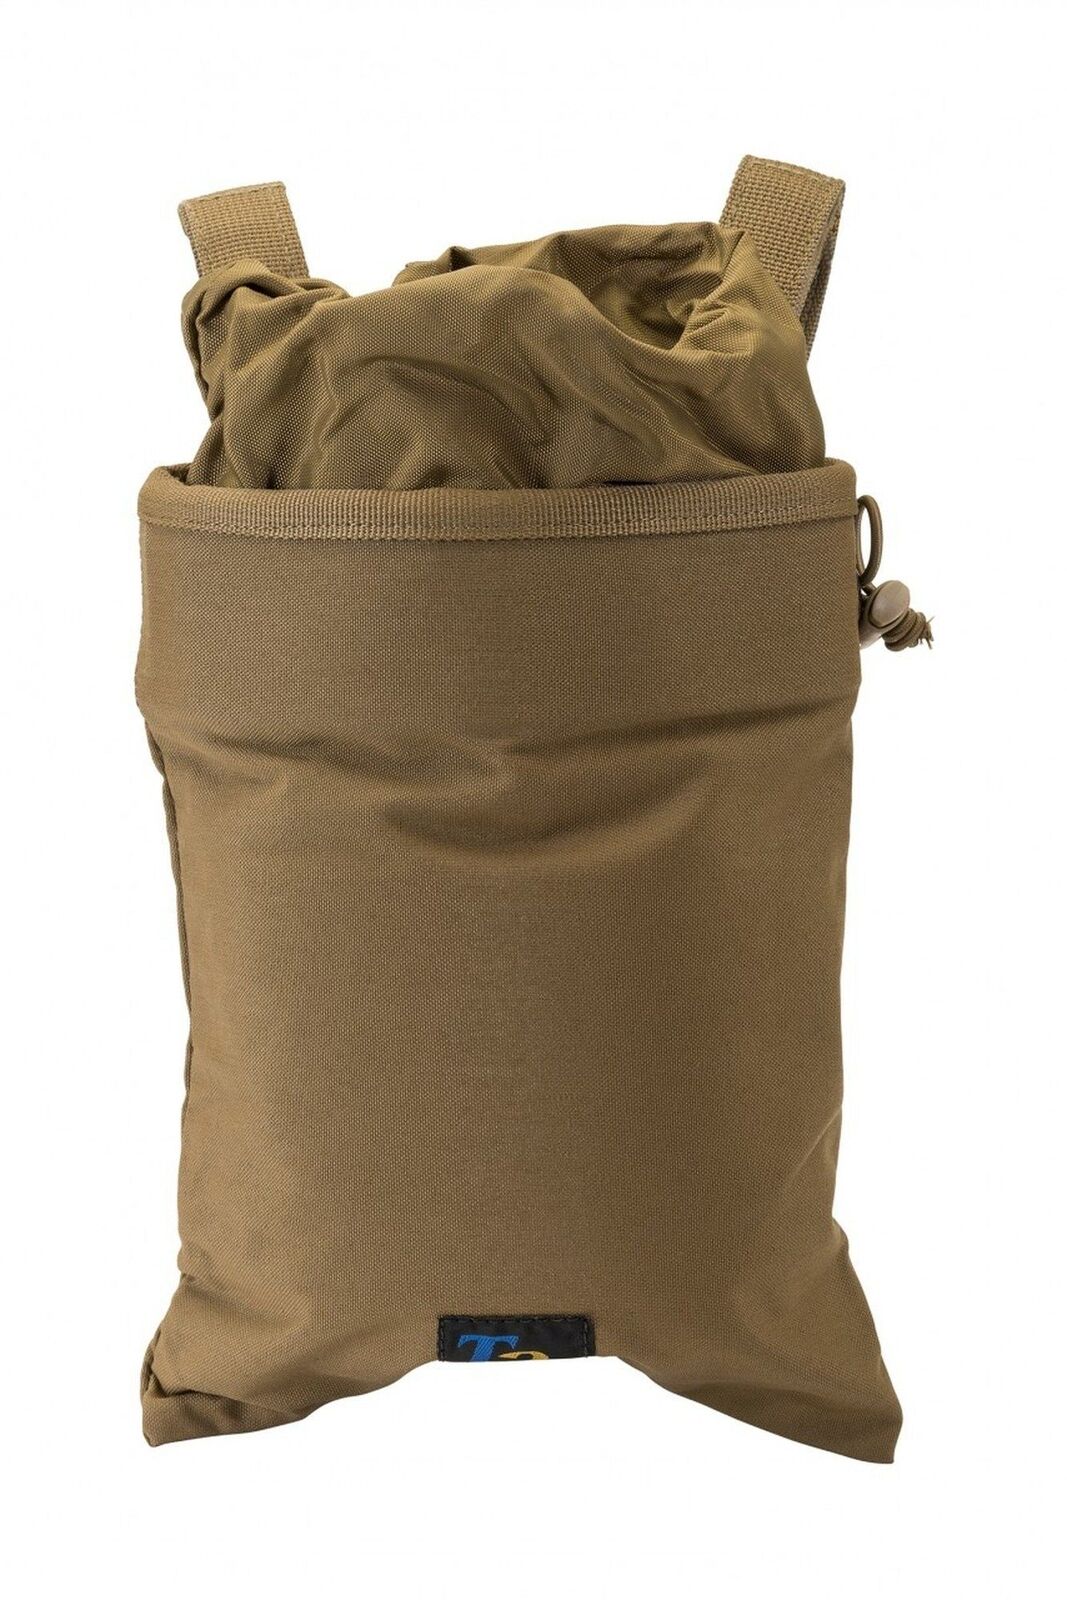 NEW T3 Gear Dump MOLLE Pouch, Large - Coyote Brown